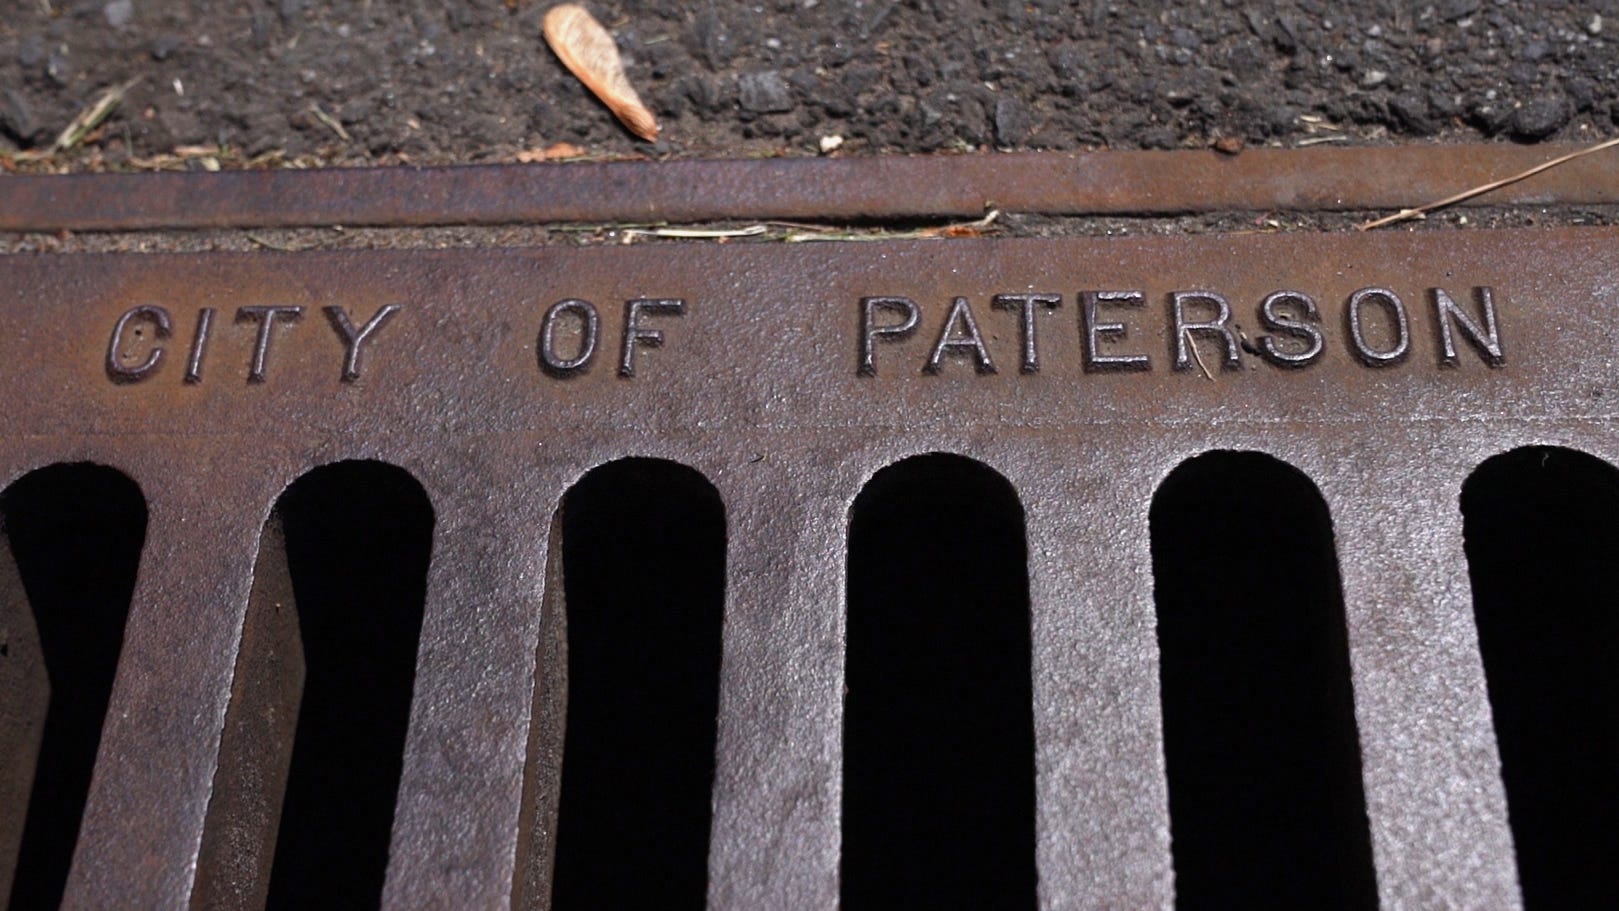 Paterson still has unpaid sewer bills from developers